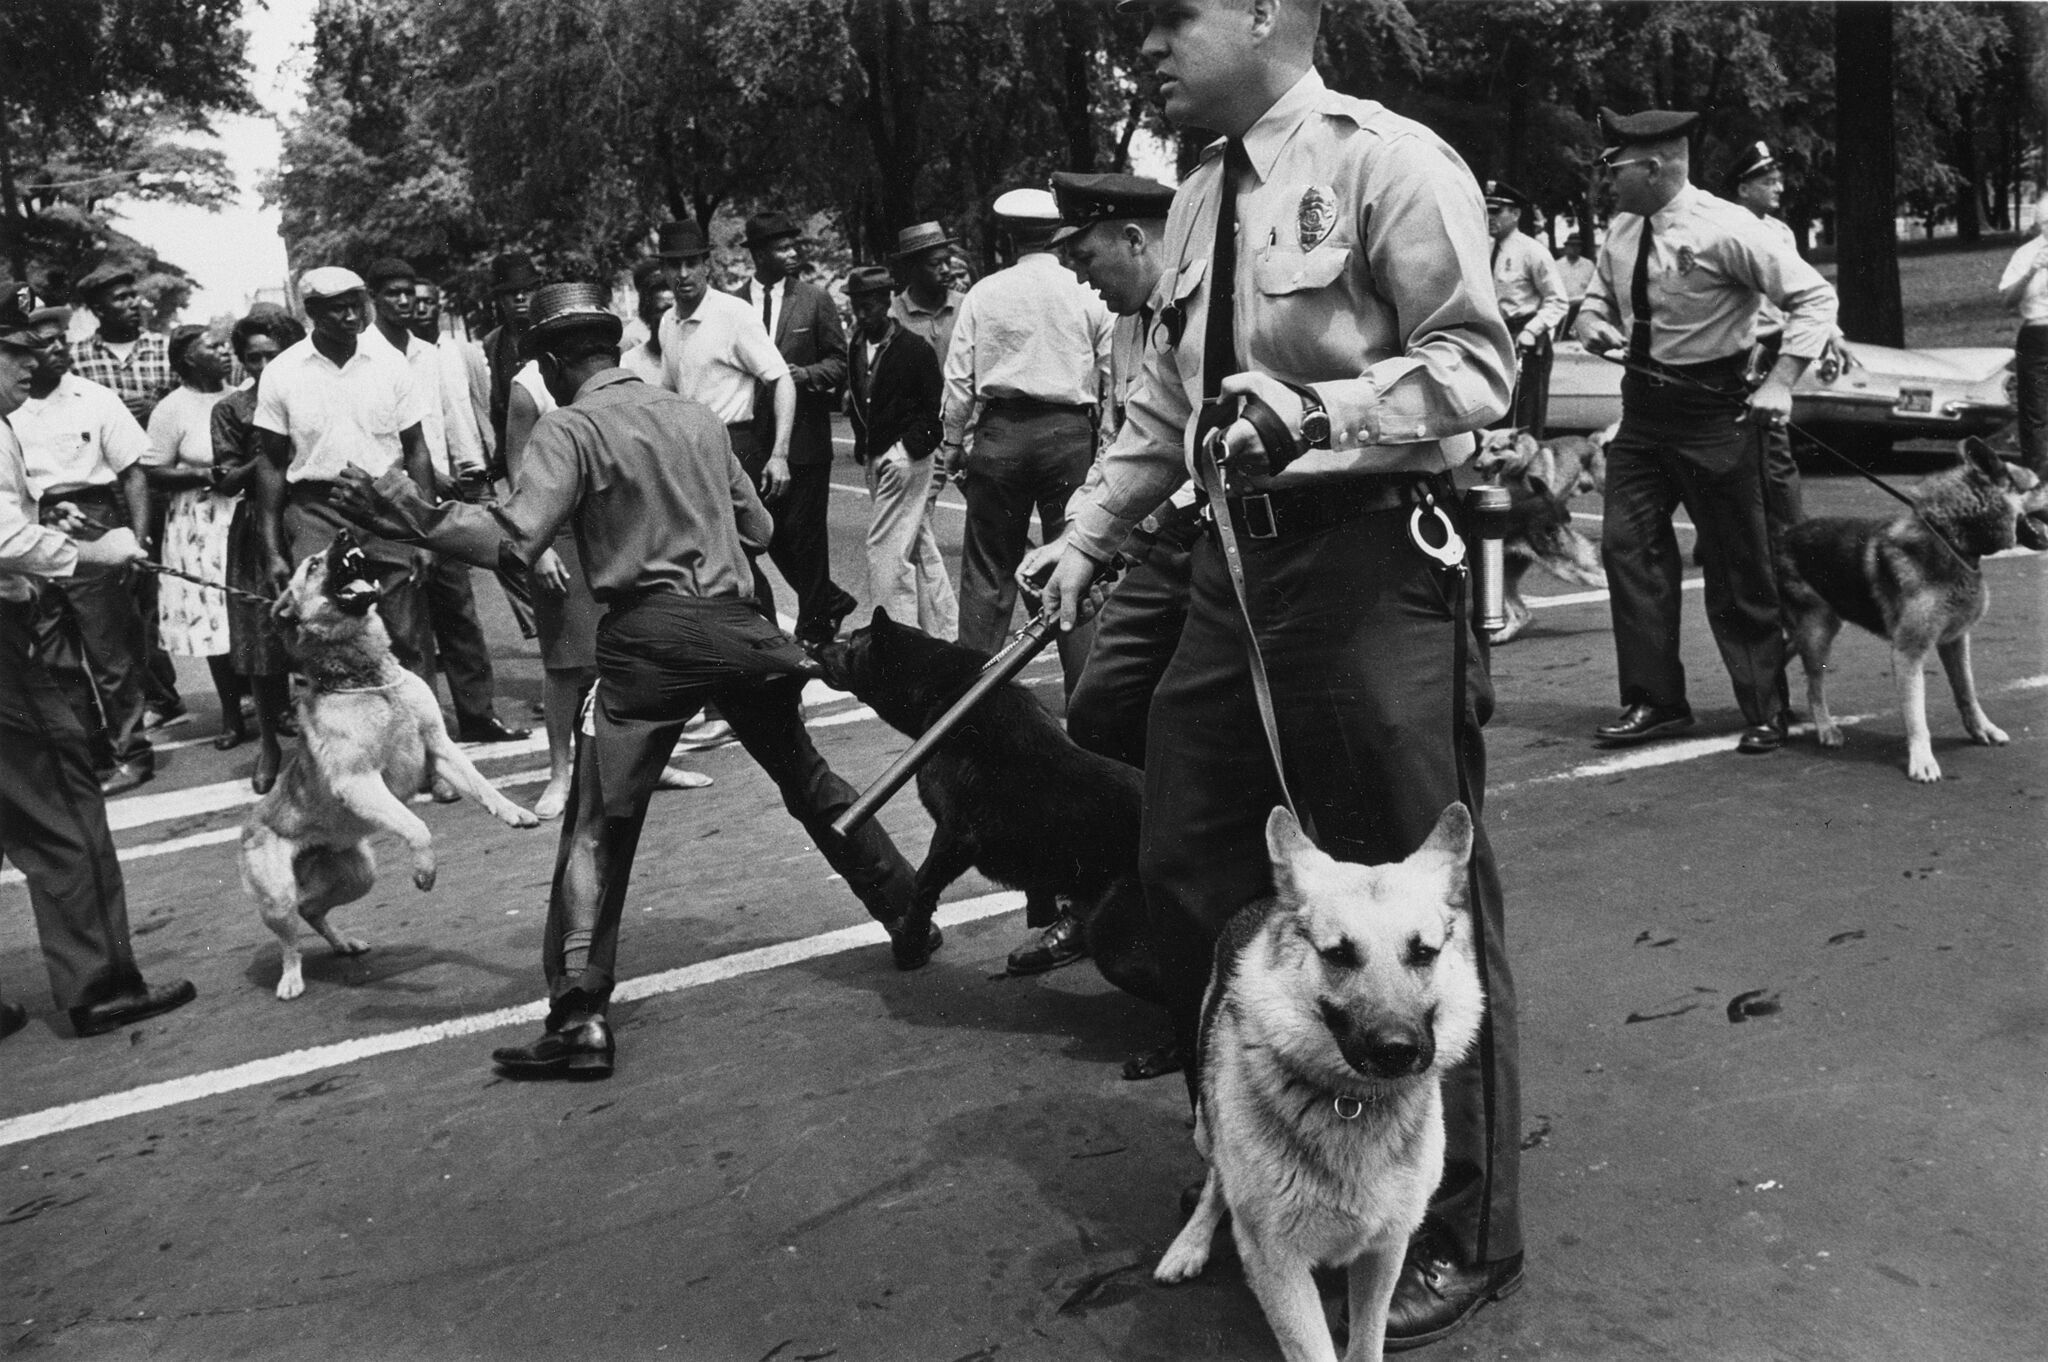 Police Dogs Used Against Demonstrators during a nonviolent demonstration.